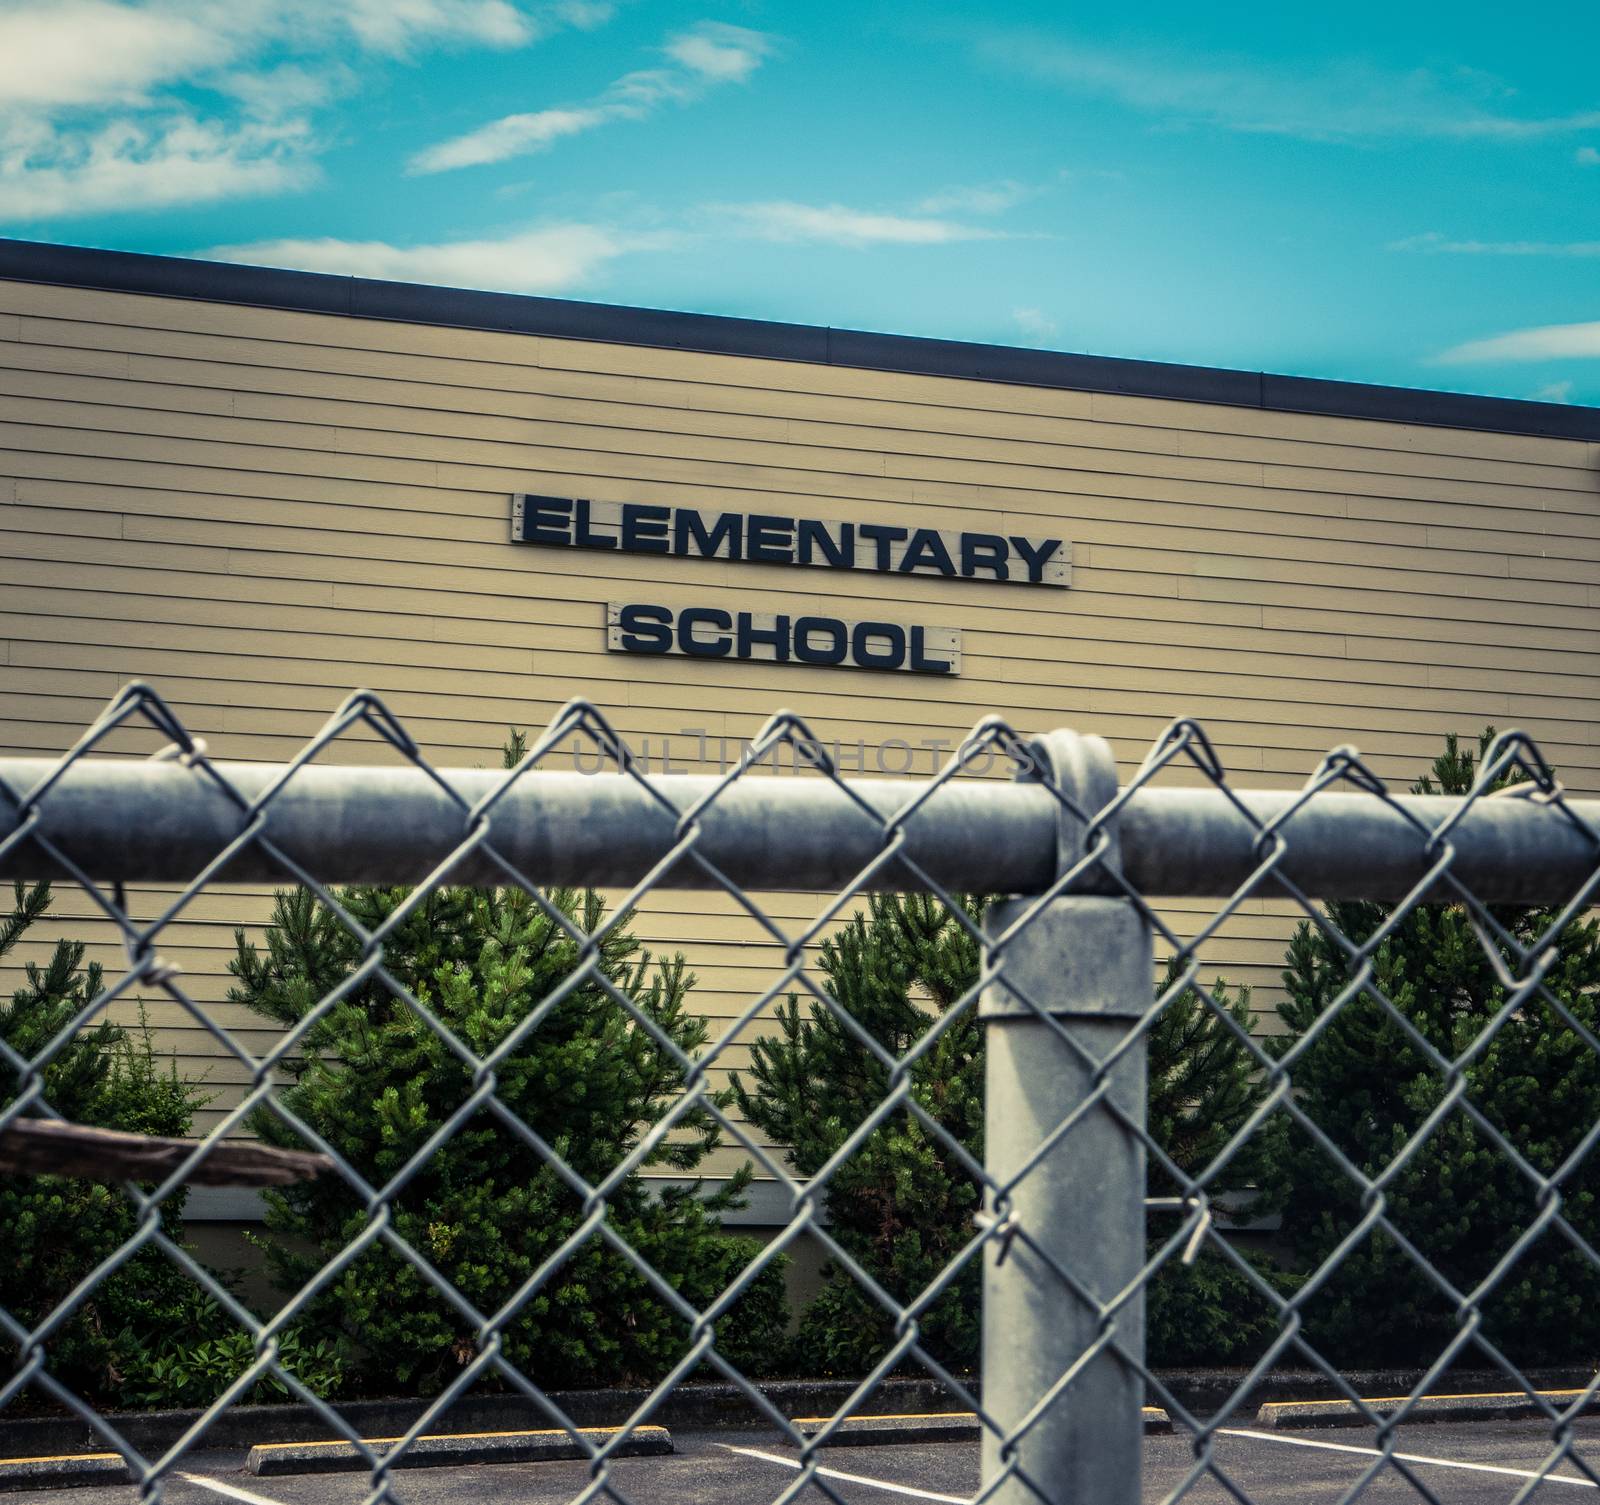 Typical USA Elementary School With Chain Link Fence In Foreground